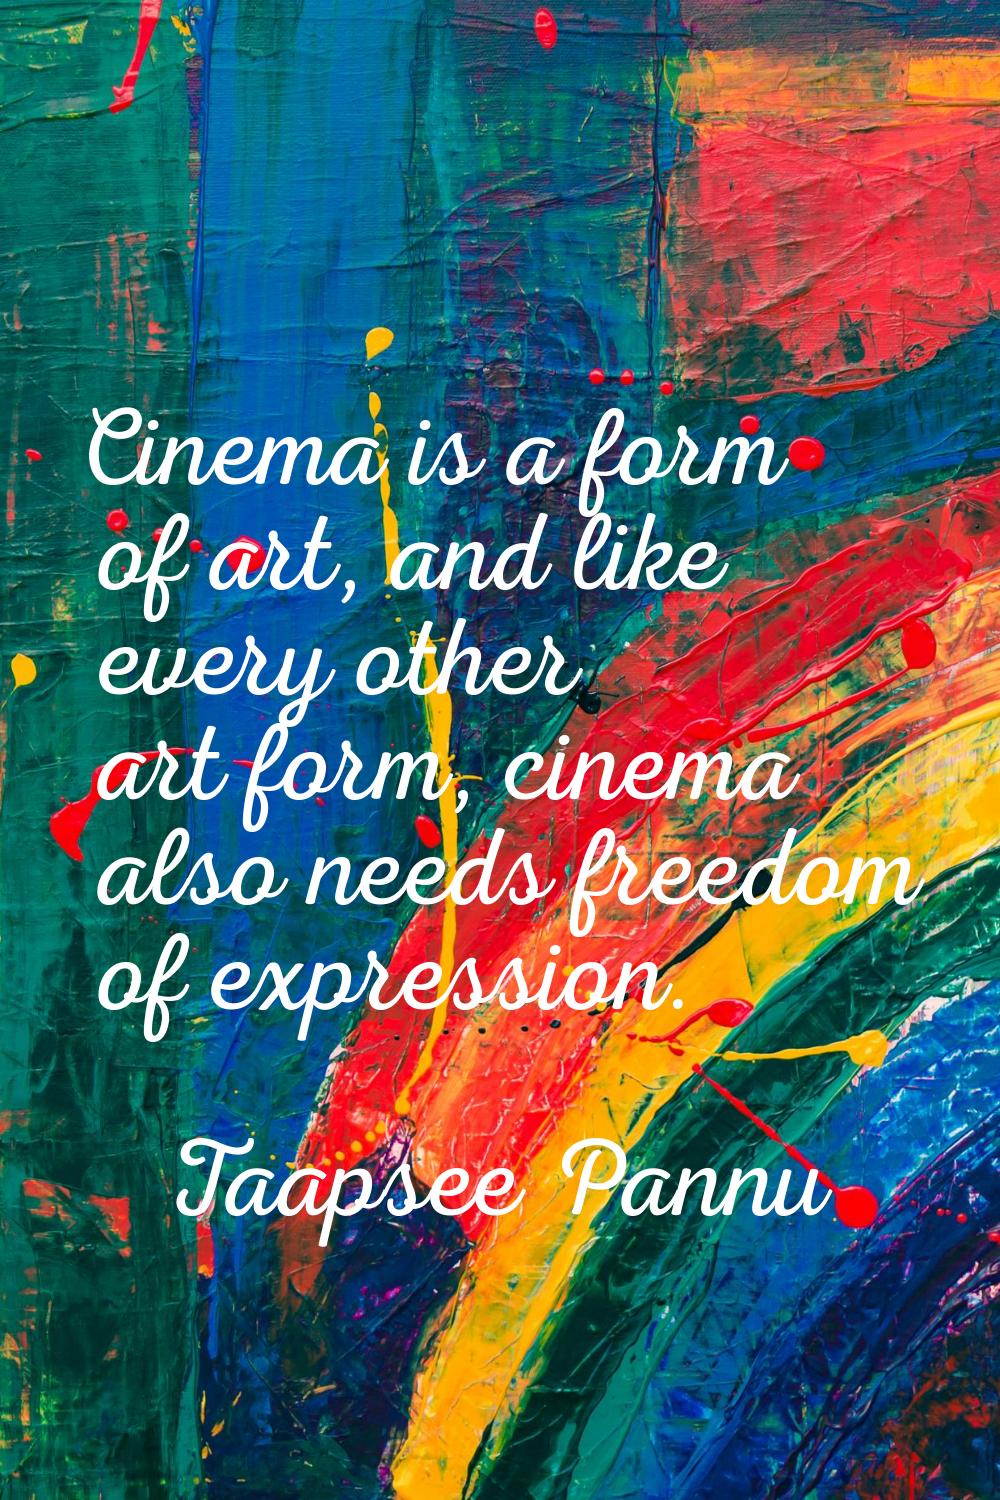 Cinema is a form of art, and like every other art form, cinema also needs freedom of expression.